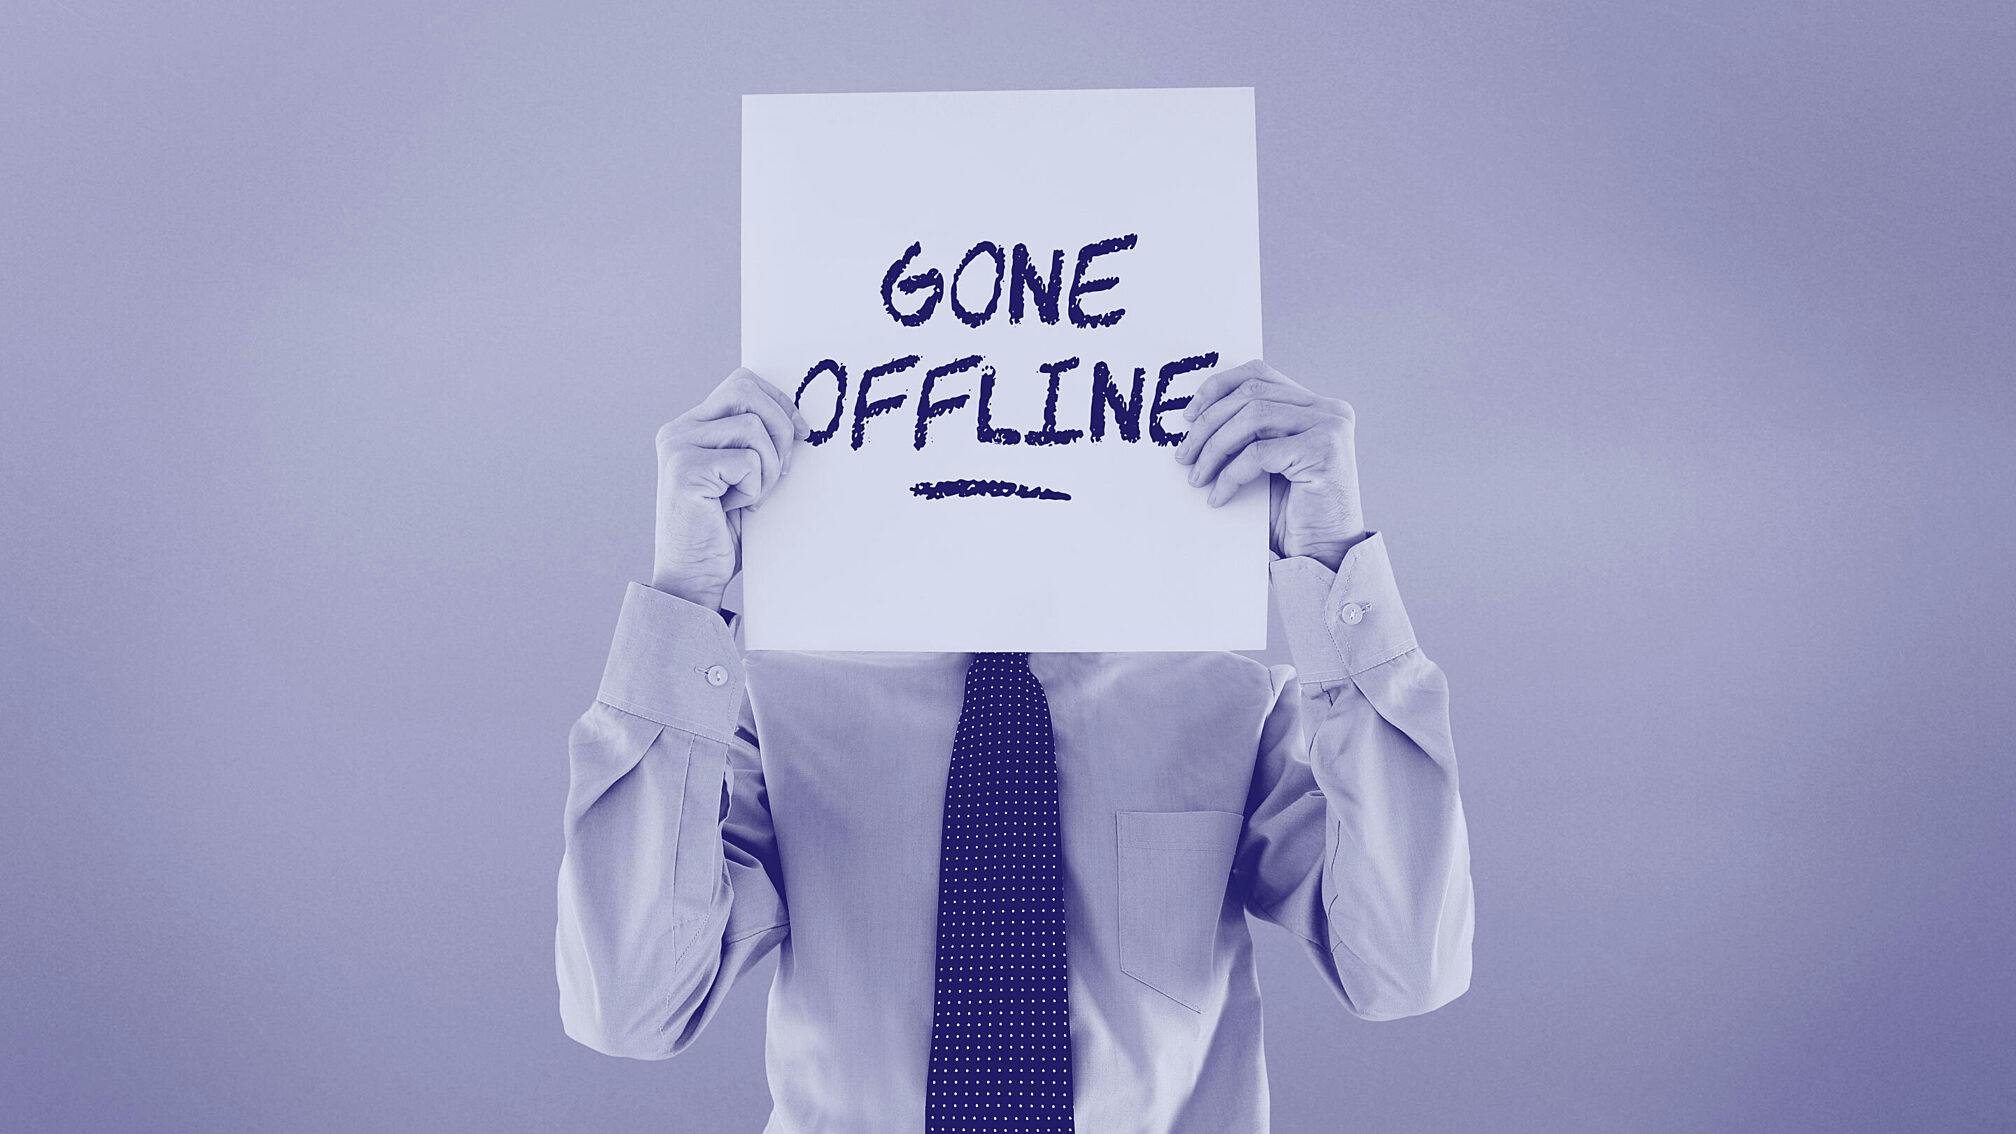 Business executive holding sign in front of face that says gone offline.